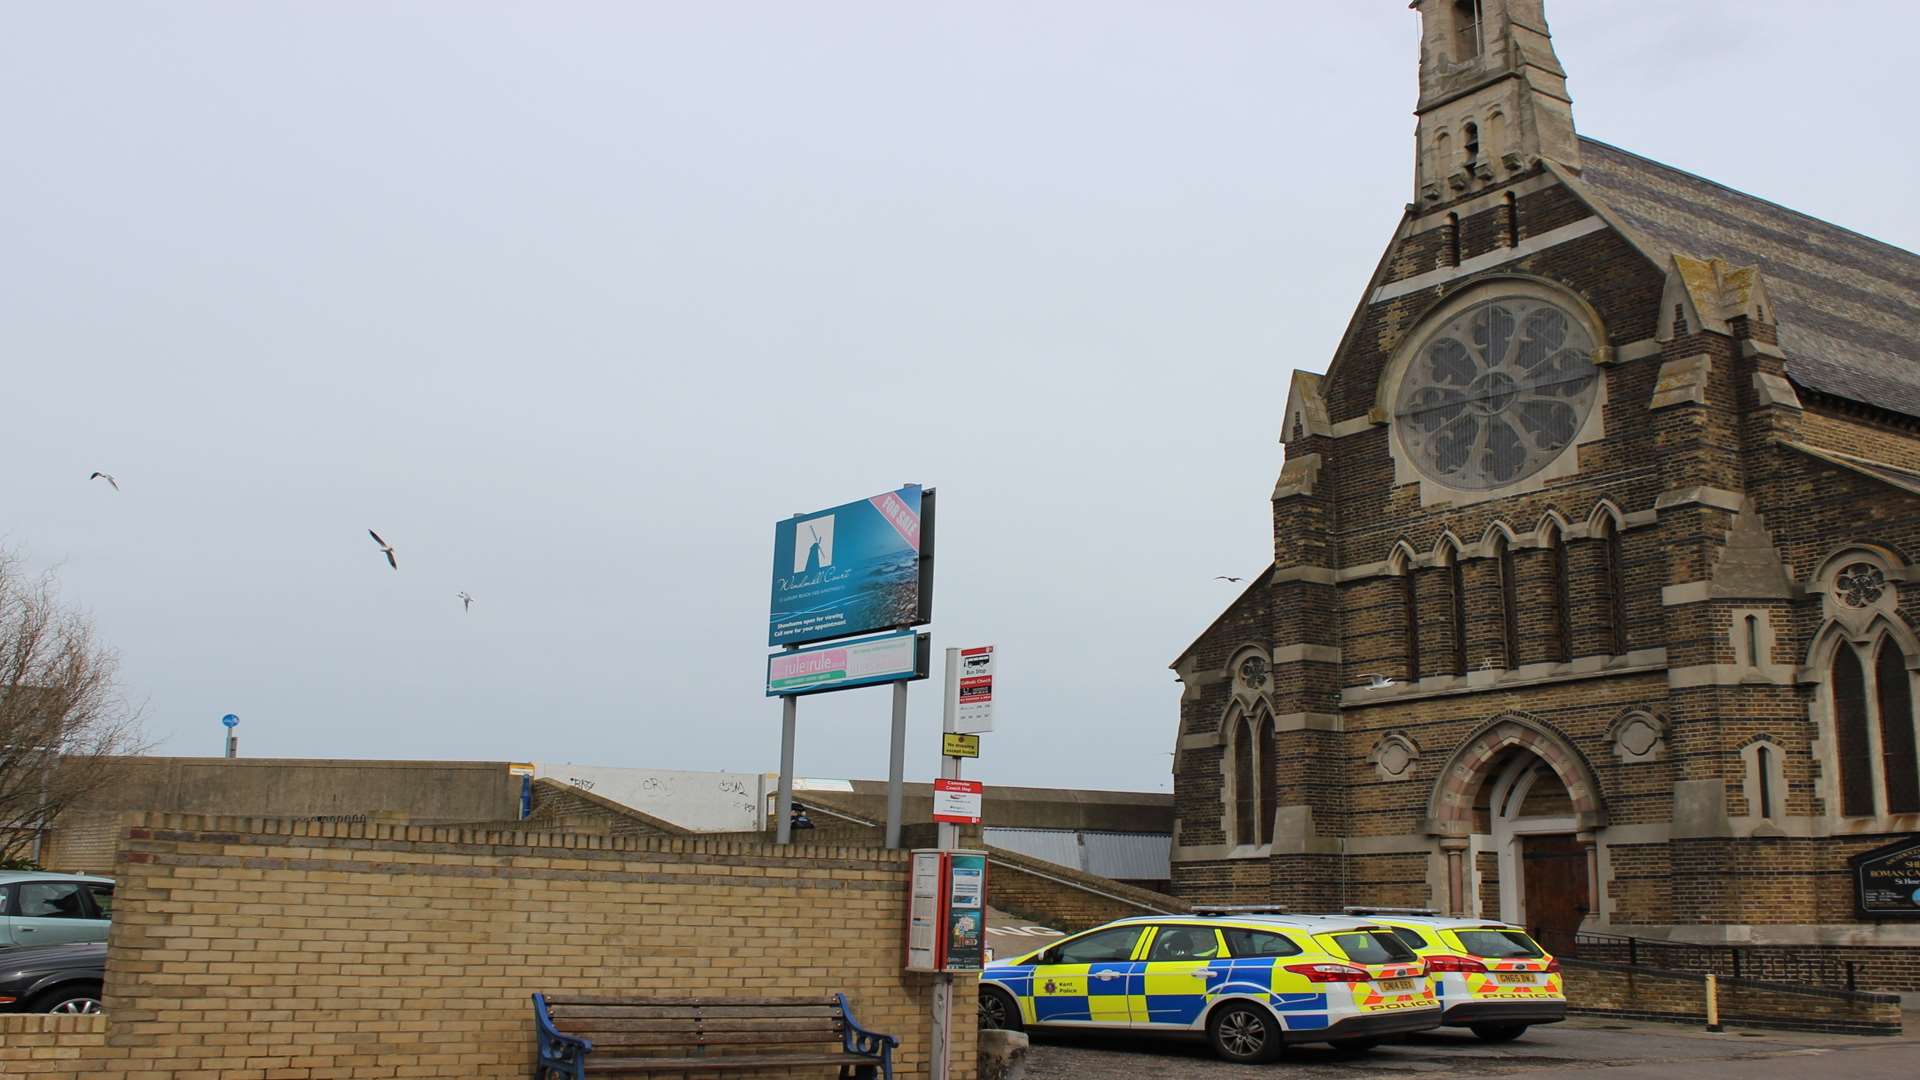 The discovery was made between the Sheerness Swimming Pool and the Roman Catholic Church.